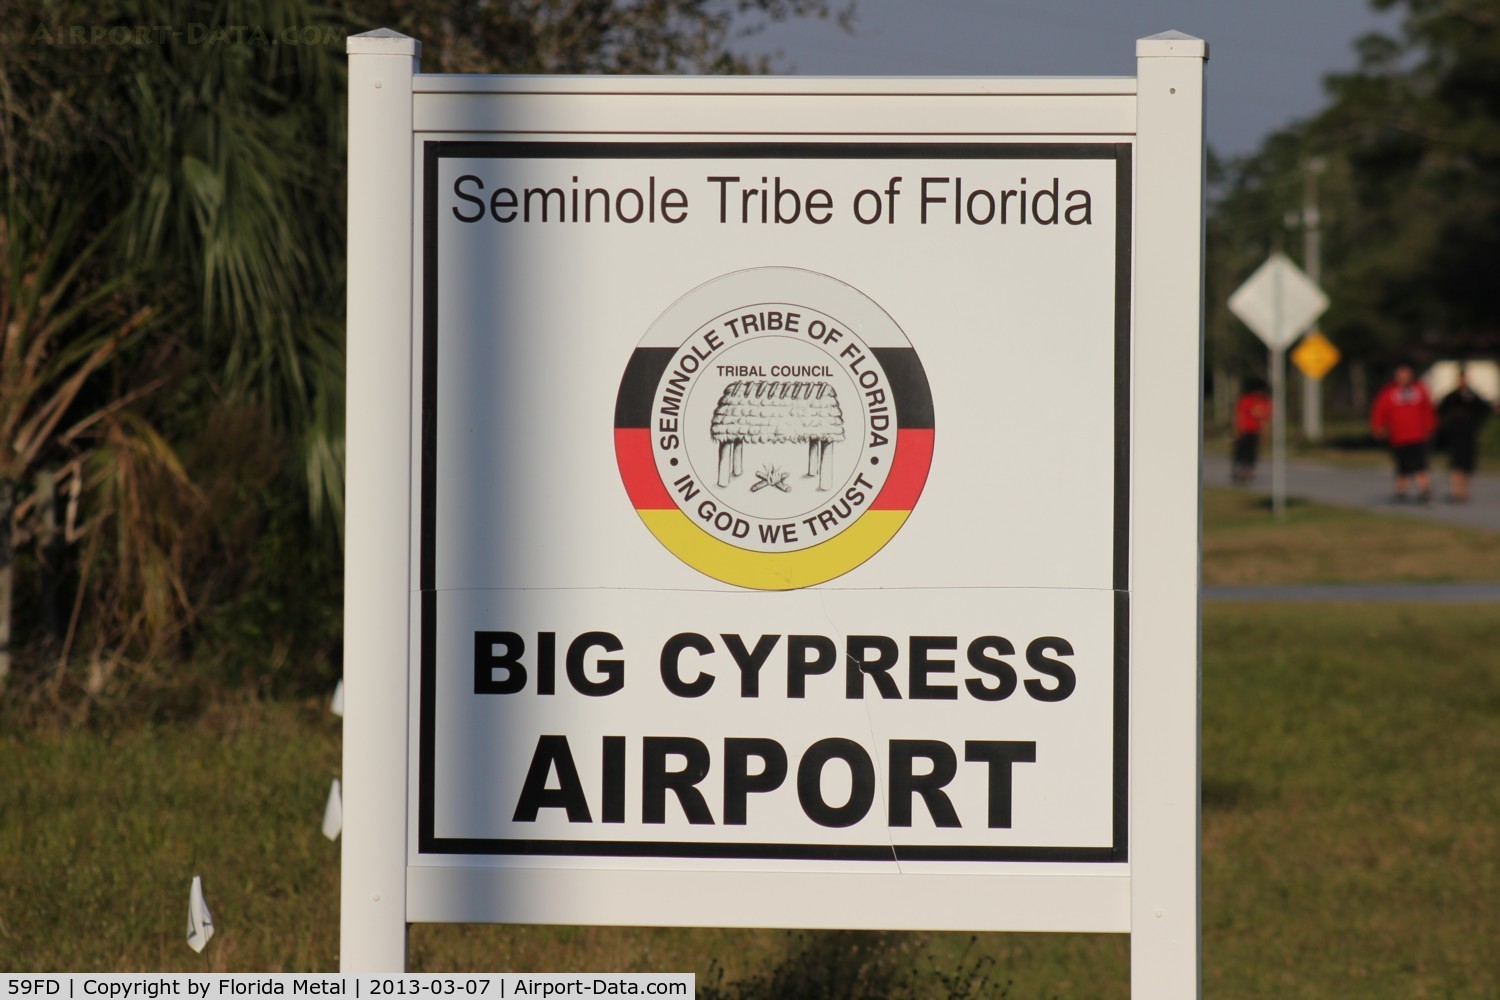 Big Cypress Airfield Airport (59FD) - Big Cypress Airport owned by the Seminole Tribe of Florida